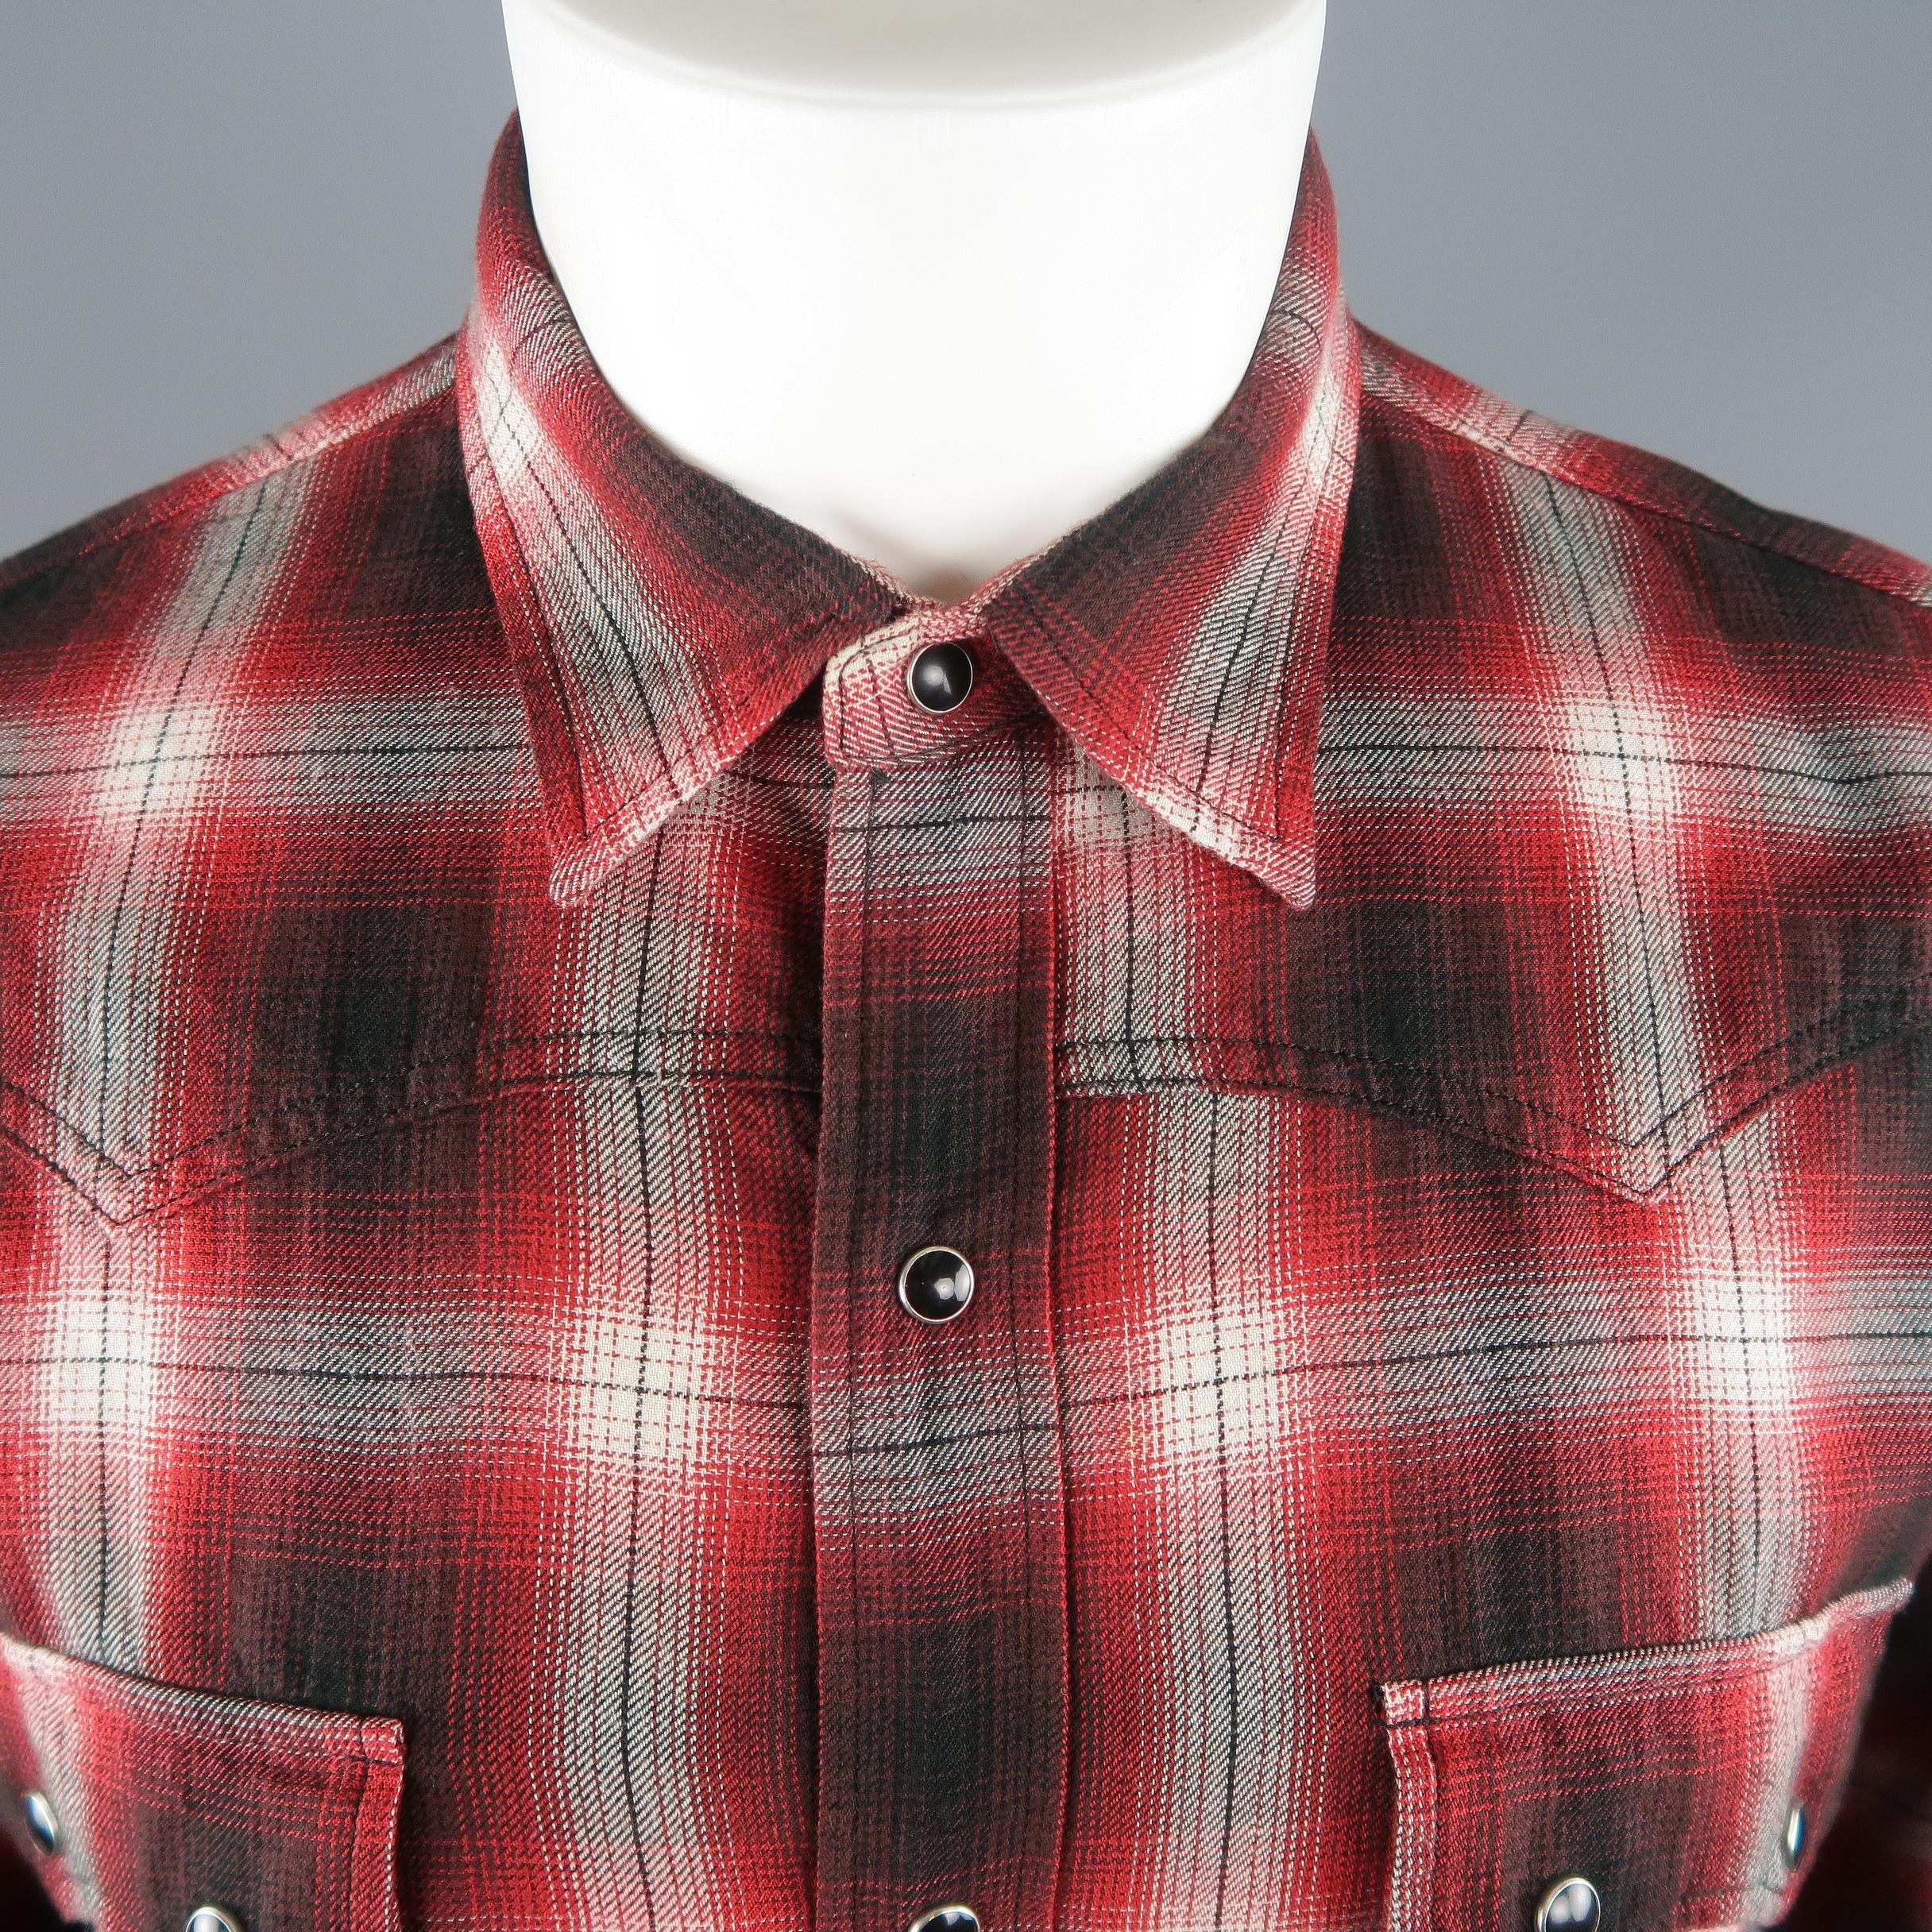 Saint Laurent Western style shirt comes in black and red plaid cotton with patch flap pockets and black pearl snaps. Made in Japan.
 
Excellent Pre-Owned Condition.
Marked:L
 
Measurements:
 
Shoulder: 17.5 in.
Chest: 45 in.
Sleeve: 23 in.
Length: